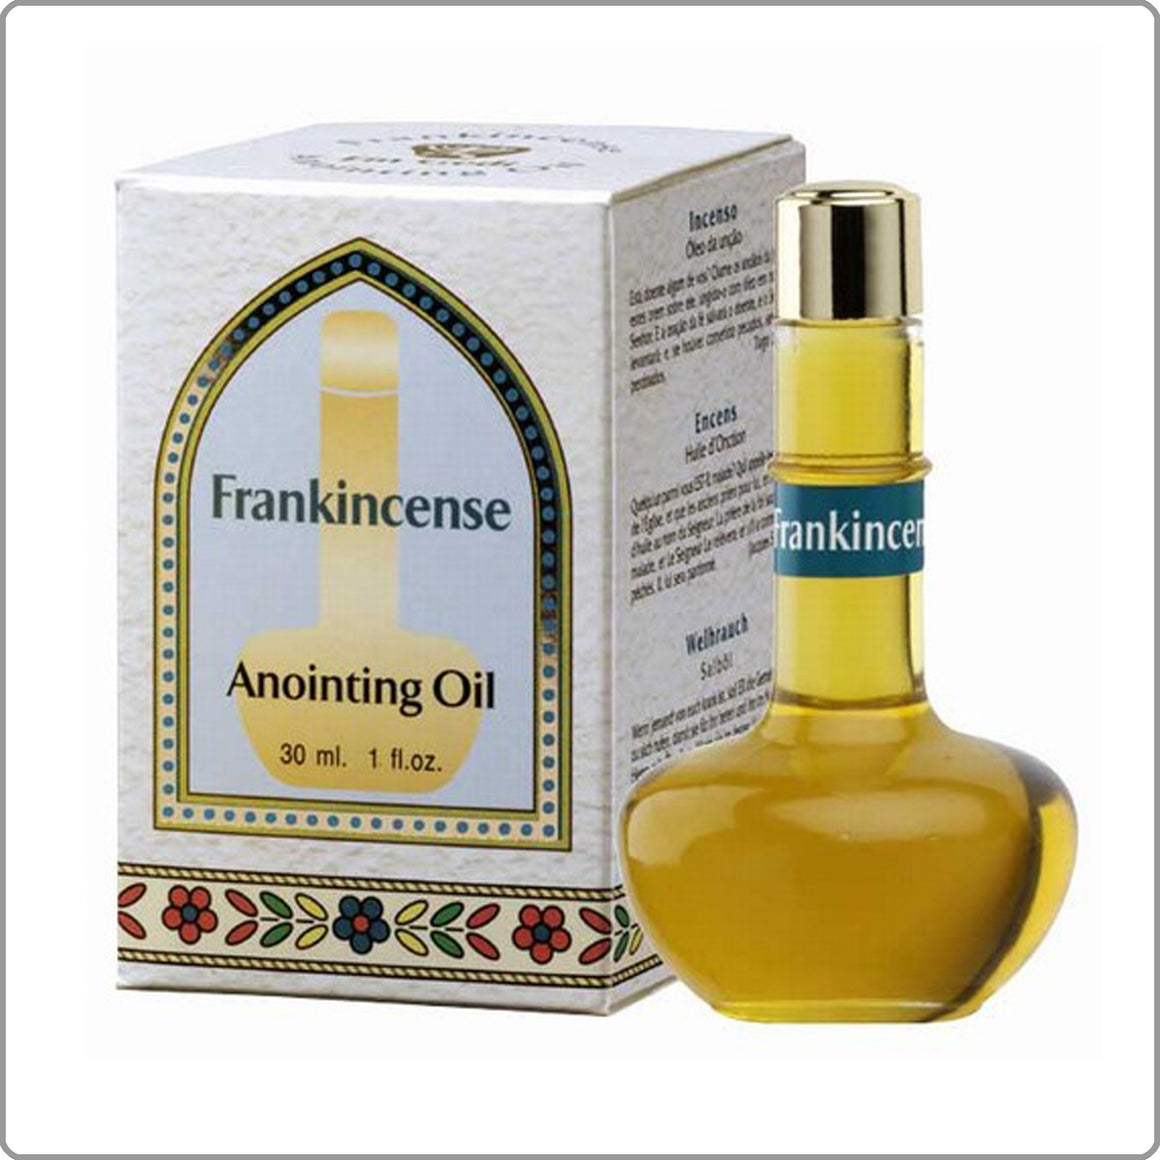 Frankincense - Anointing Oil 30 ml.